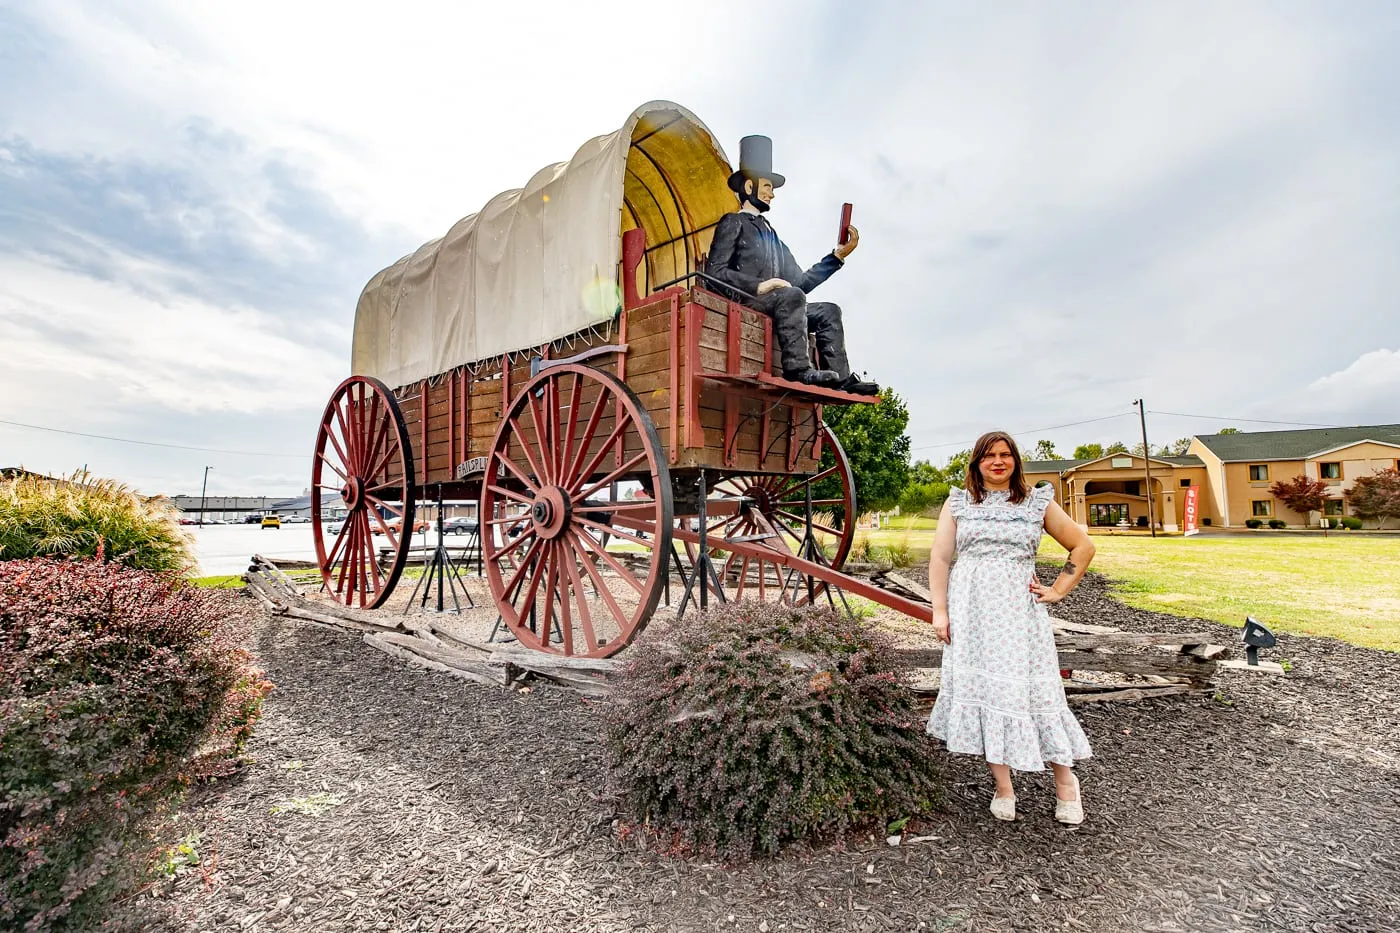 Giant Abraham Lincoln statue on the World's Largest Covered Wagon in Lincoln, Illinois Route 66 roadside attraction